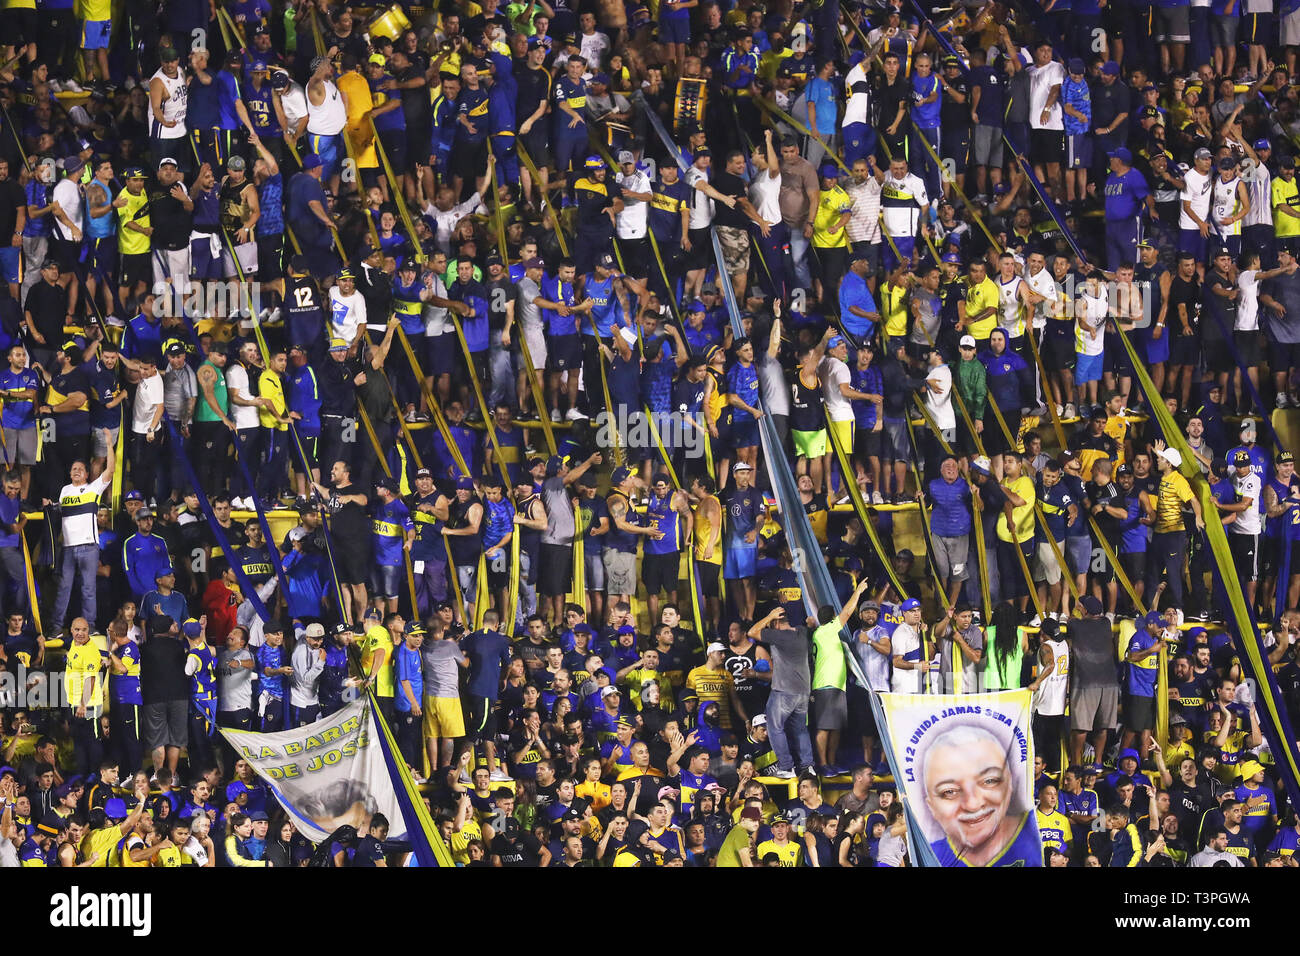 Buenos Aires, Argentina - April 10, 2019: Boca Juniors barra brava before the match starts against Wilstermann in the bombonera in Buenos Aires, Argen Stock Photo